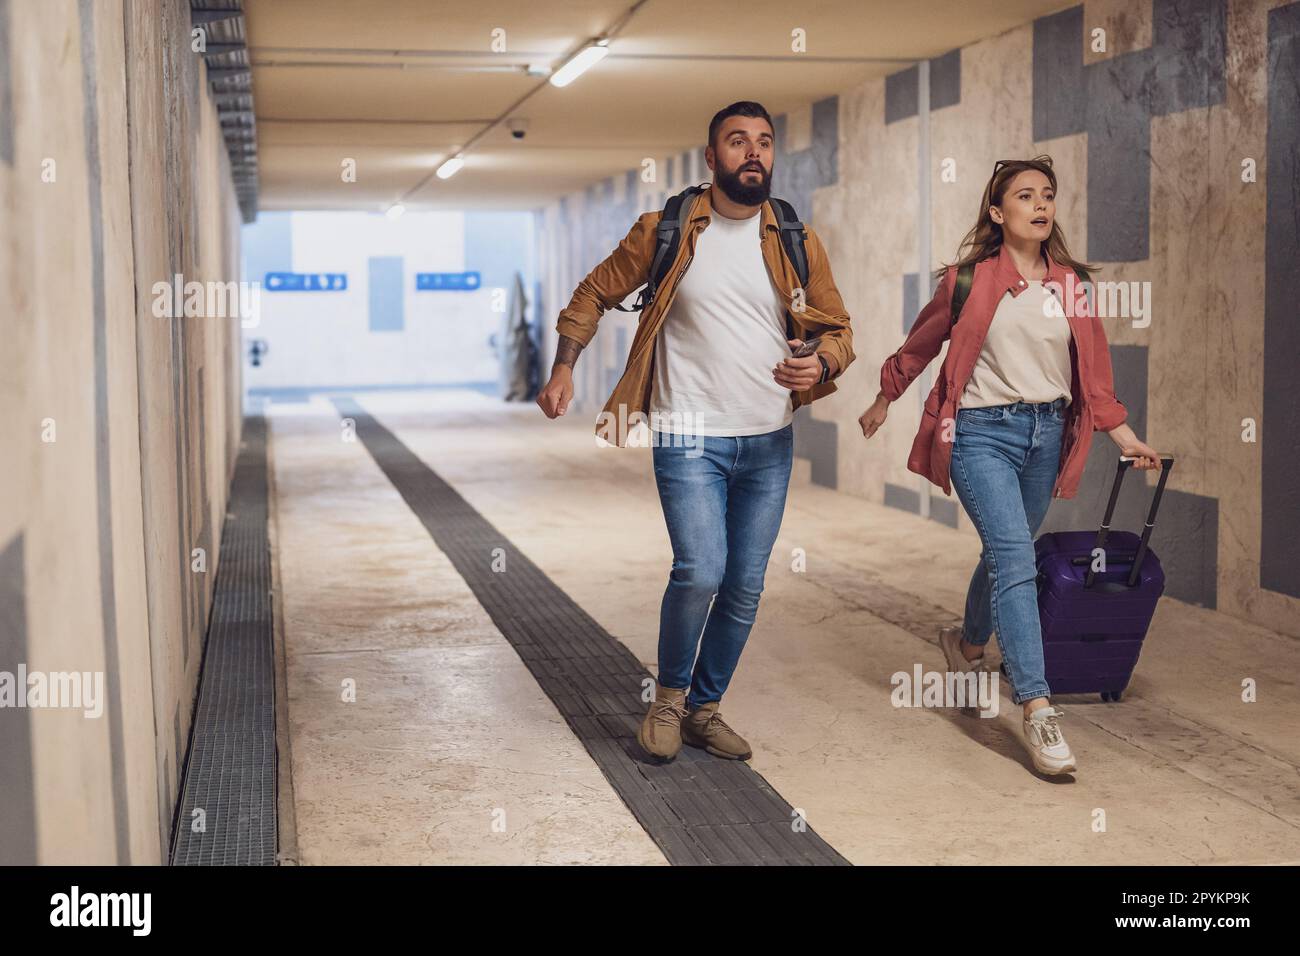 Adult couple is in a hurry to catch the train on time. Stock Photo